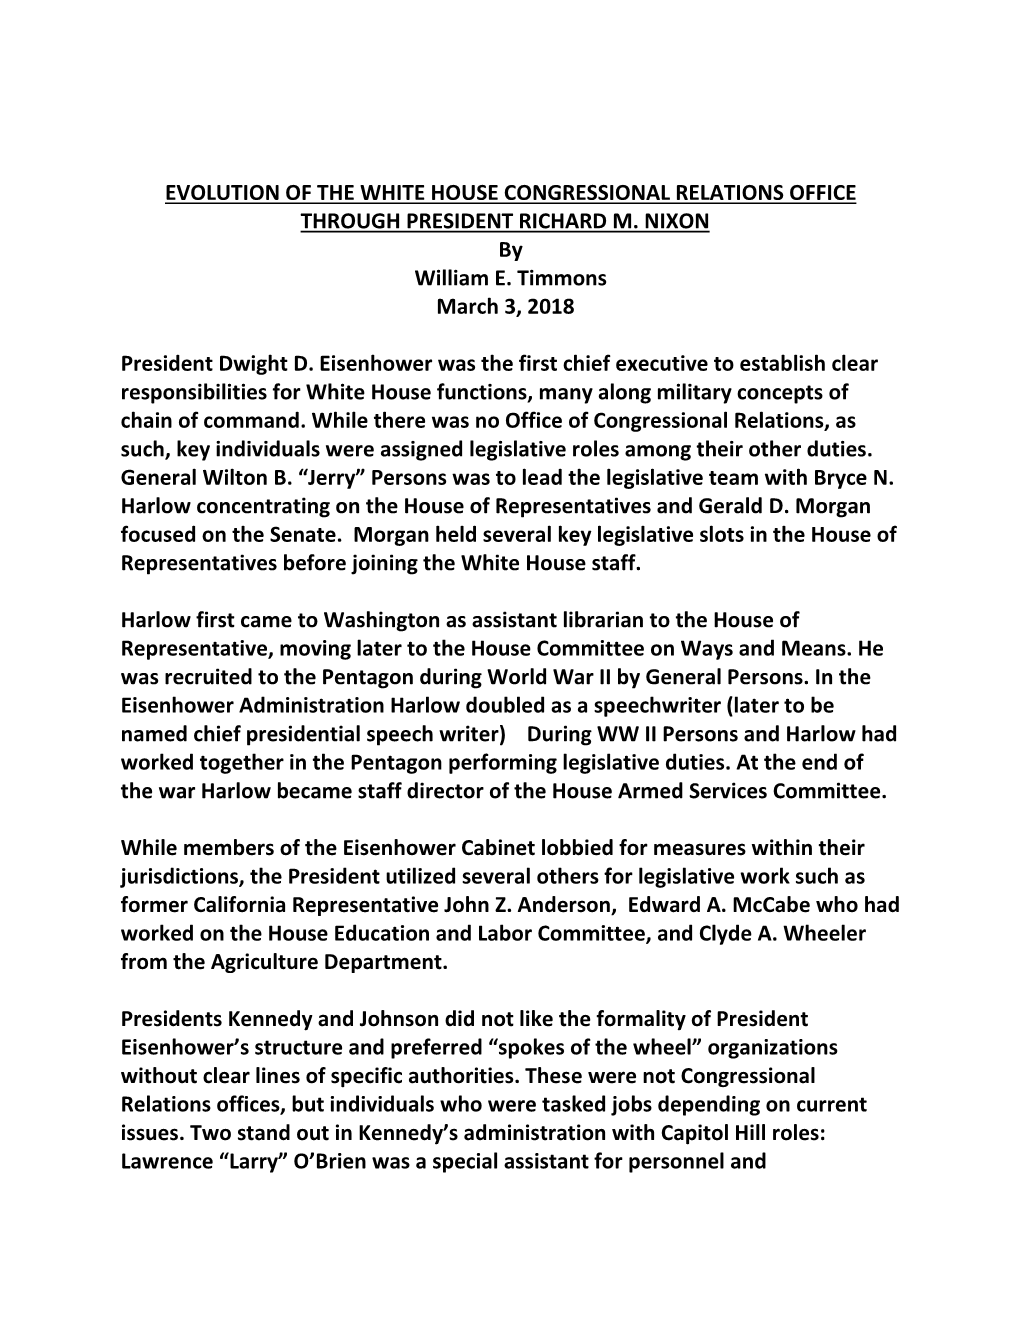 Evolution of the White House Congressional Relations Office Through President Richard M